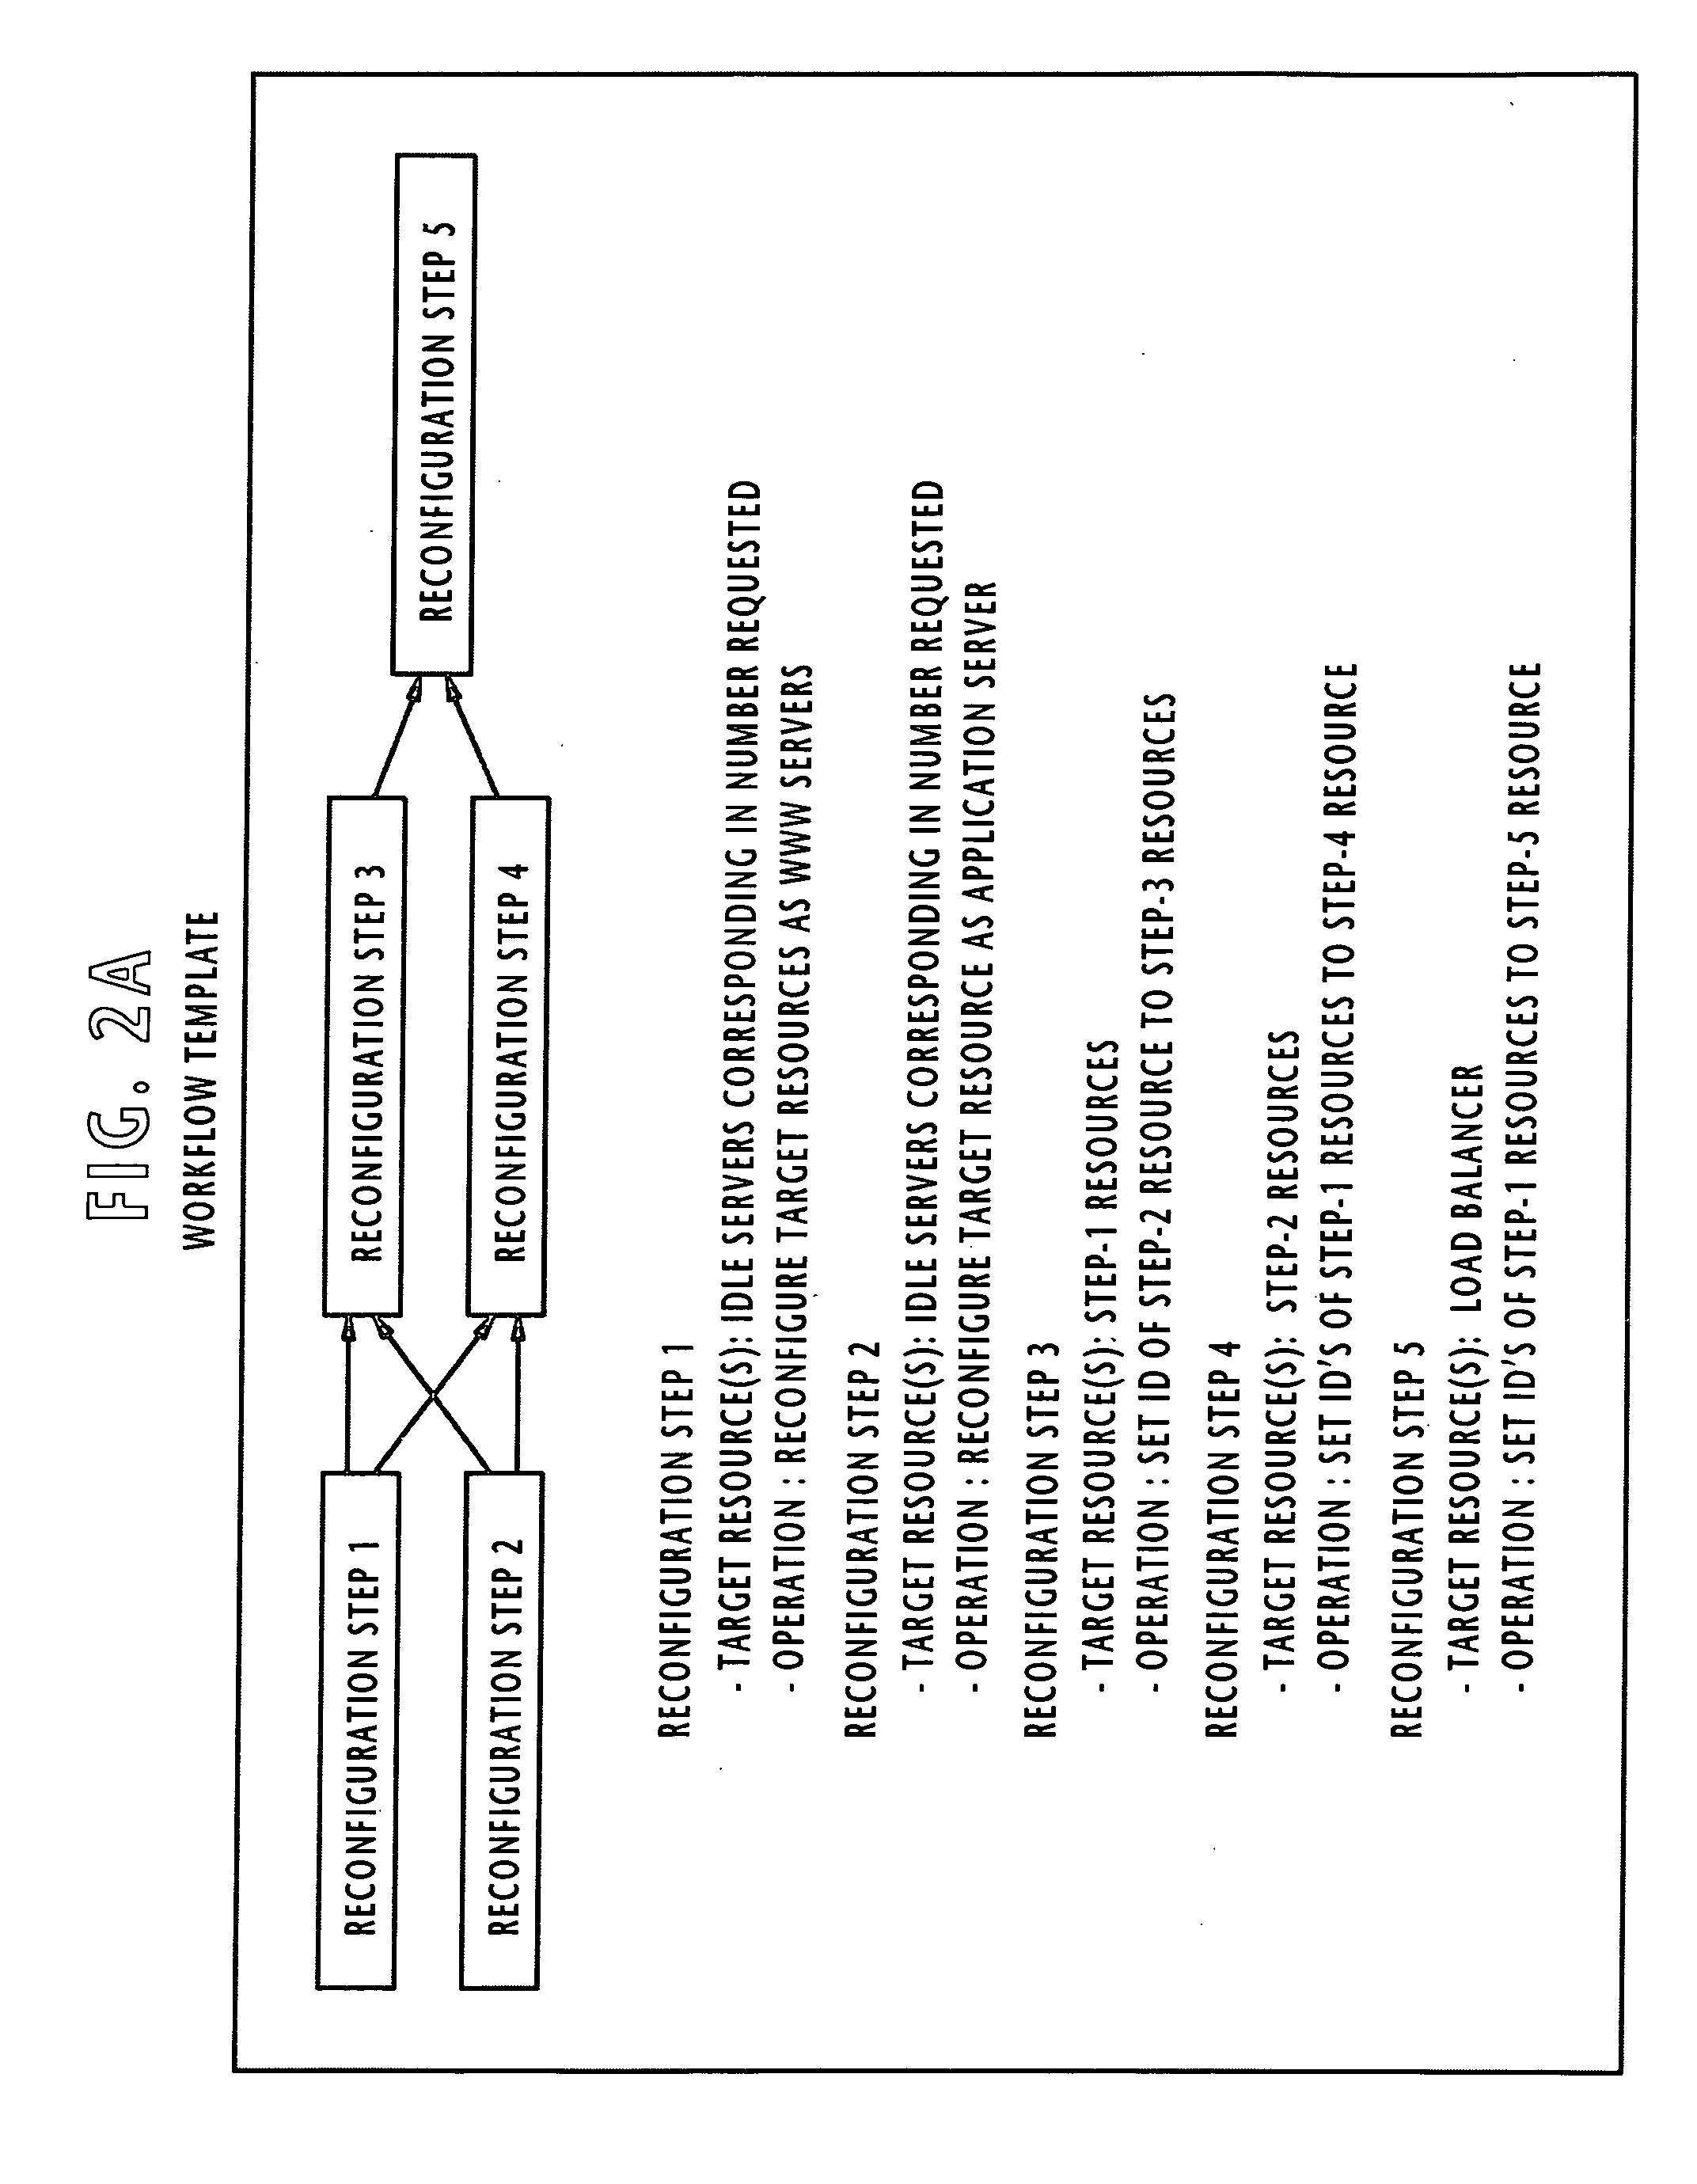 Acquisition system for distributed computing resources